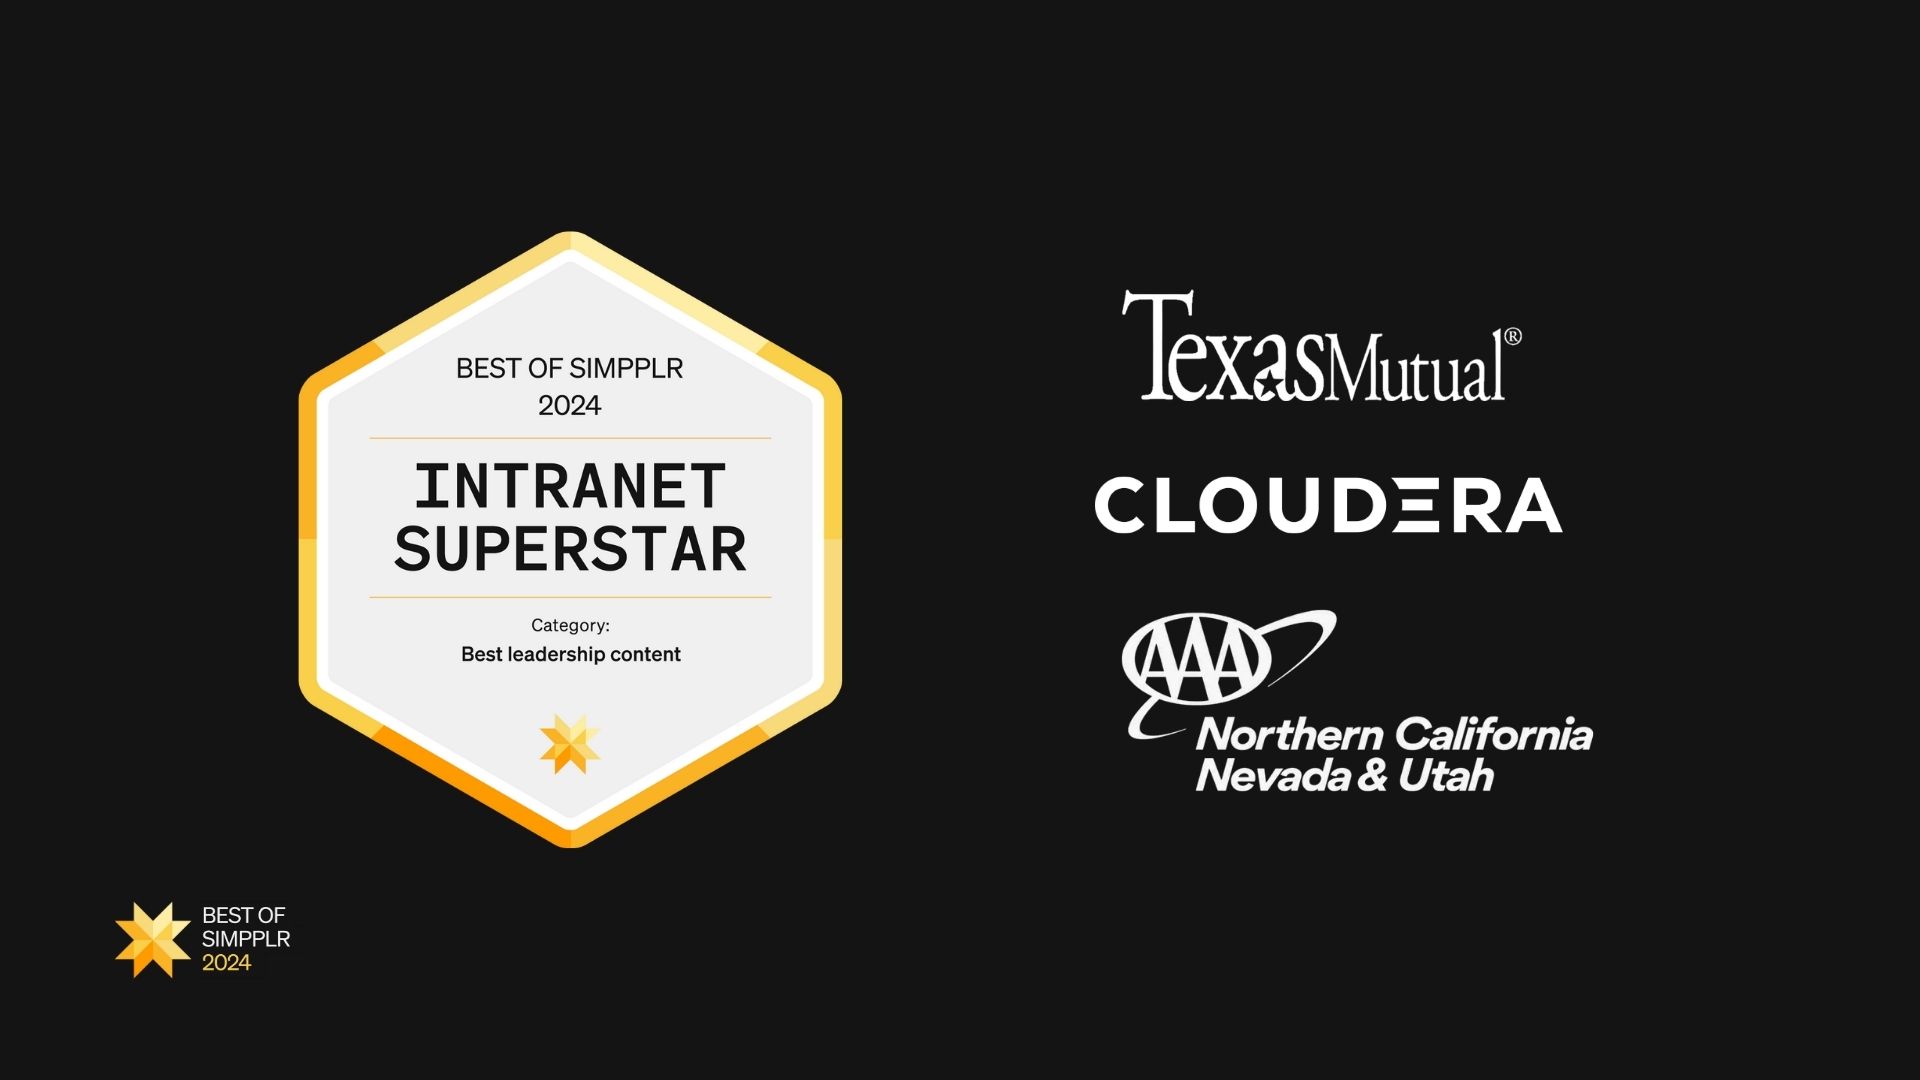 Best of Simpplr 2024 intranet contest winners - Best leadership content: TexasMutual, Cloudera, AAA Northern California, Nevada and Utah